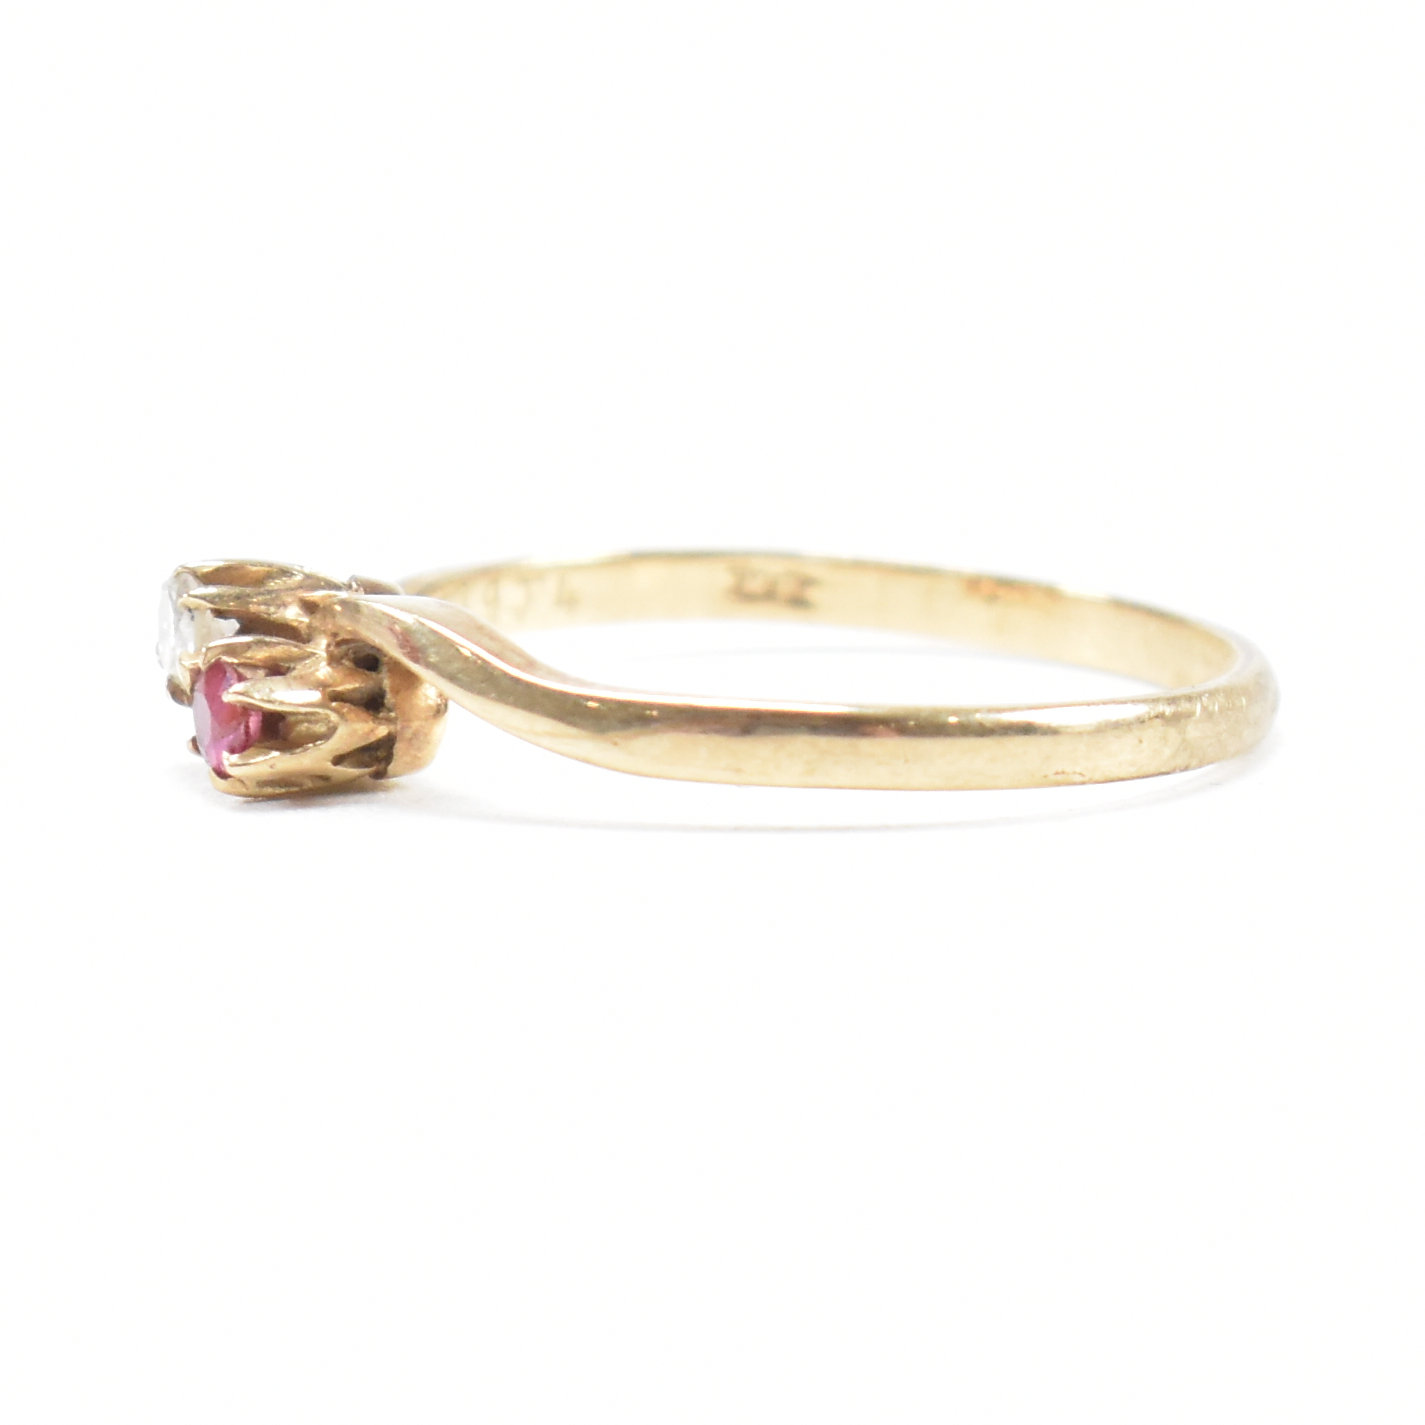 VINTAGE HALLMARKED 9CT GOLD DIAMOND & RUBY CROSSOVER RING - Image 3 of 11